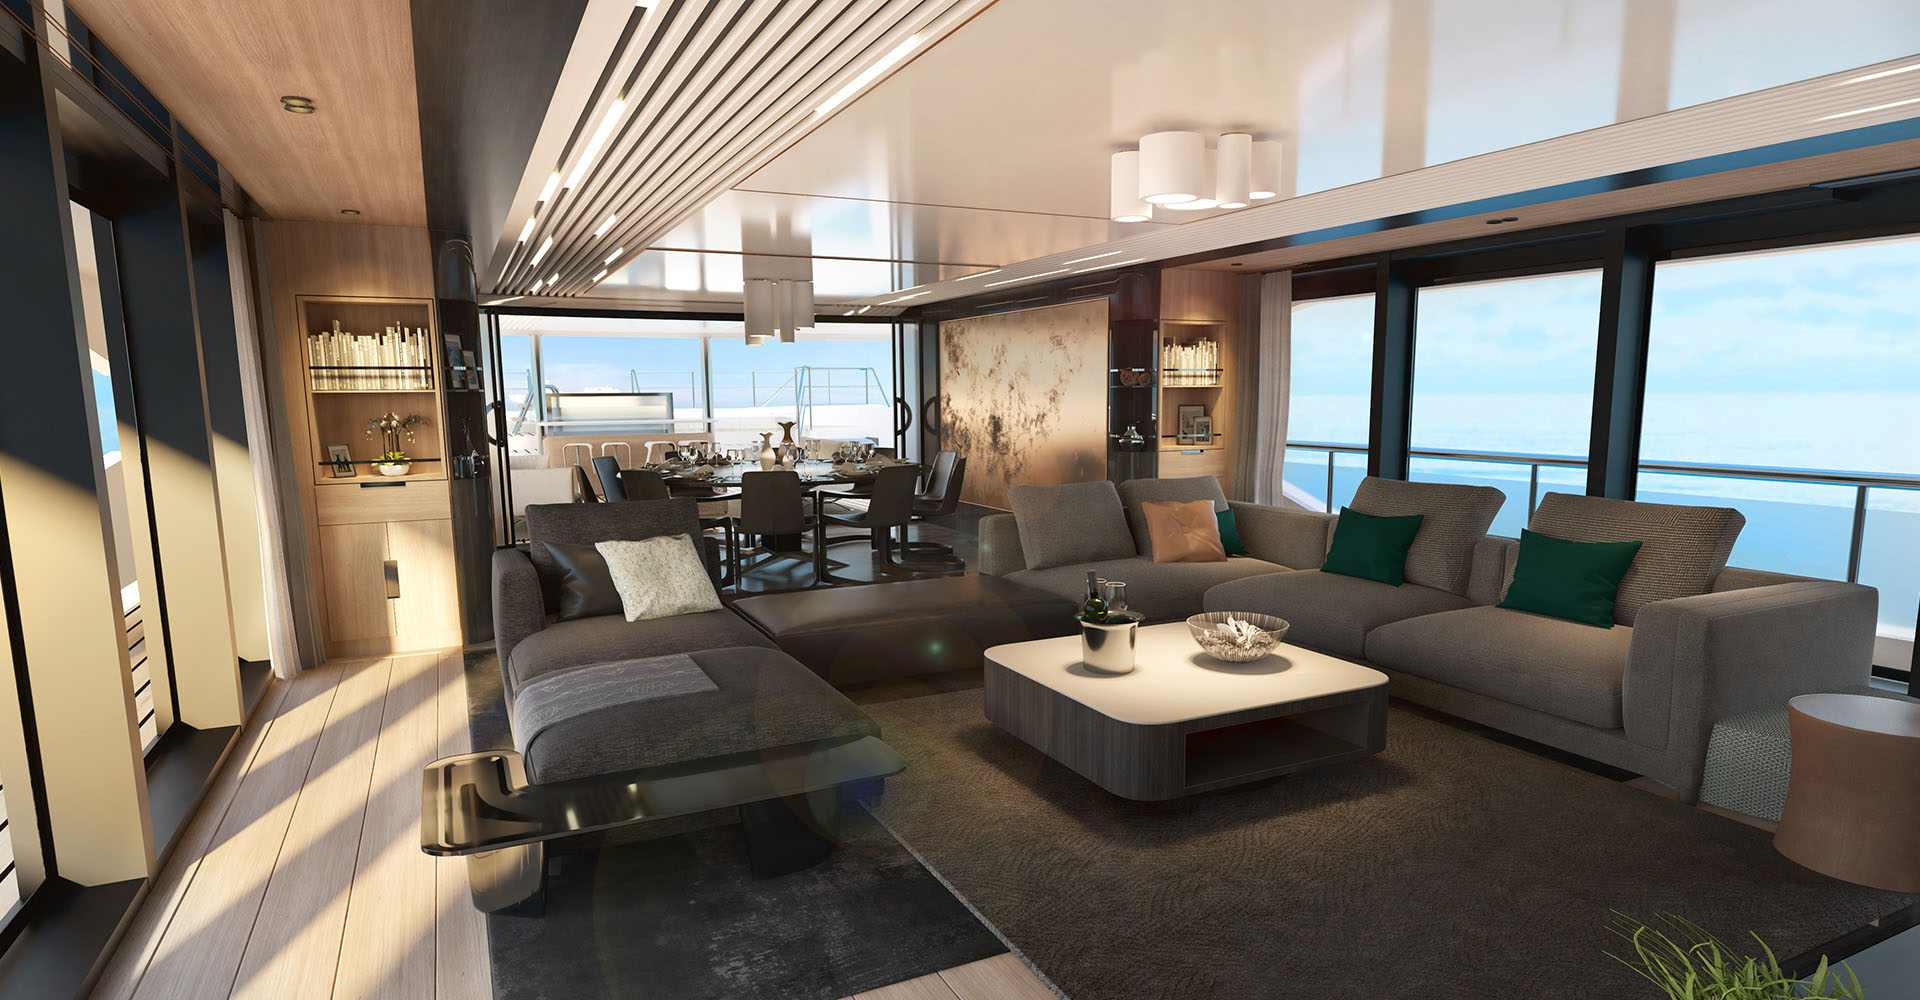 Skylounge of the Sunseeker 50m superyacht